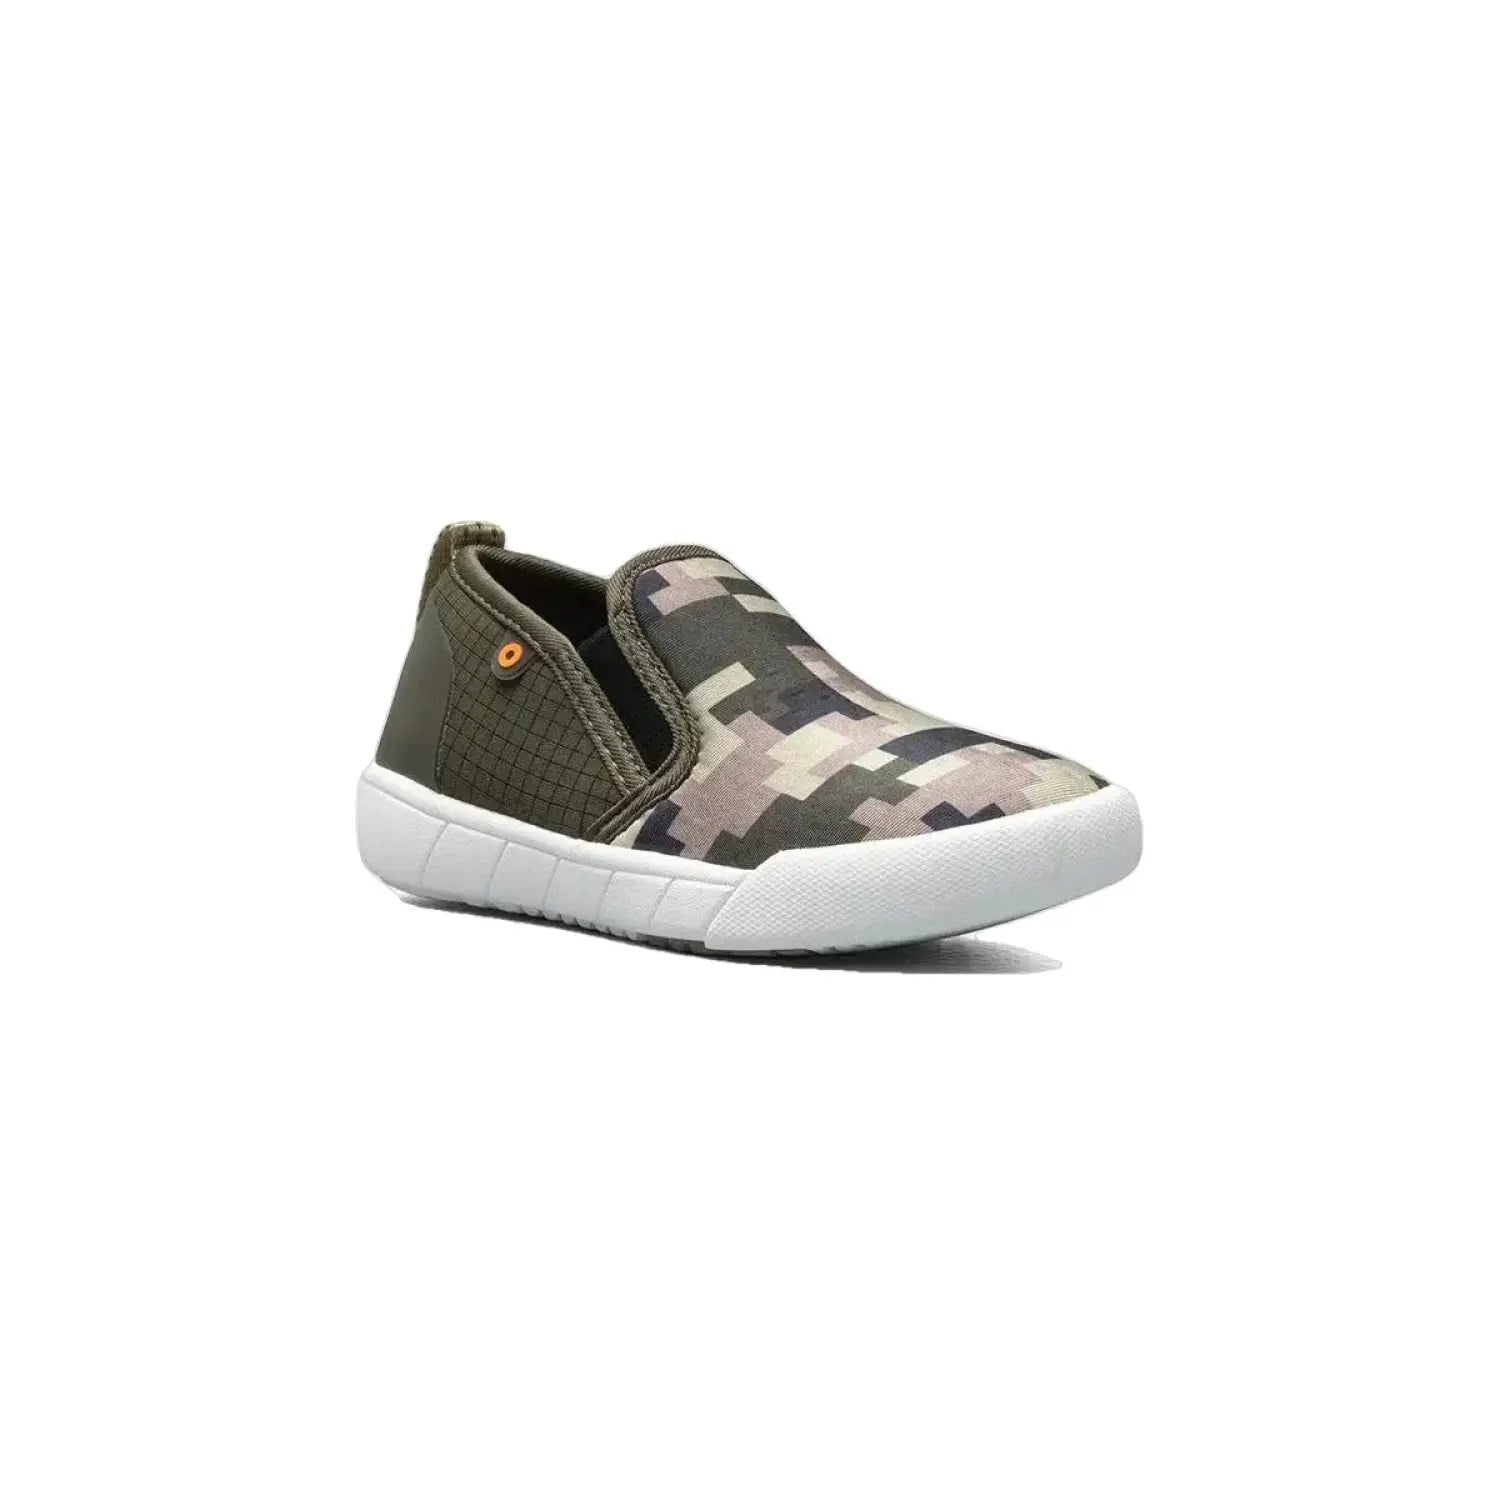 BOGS K's Kicker II Slip On, Army Green, front and side view 